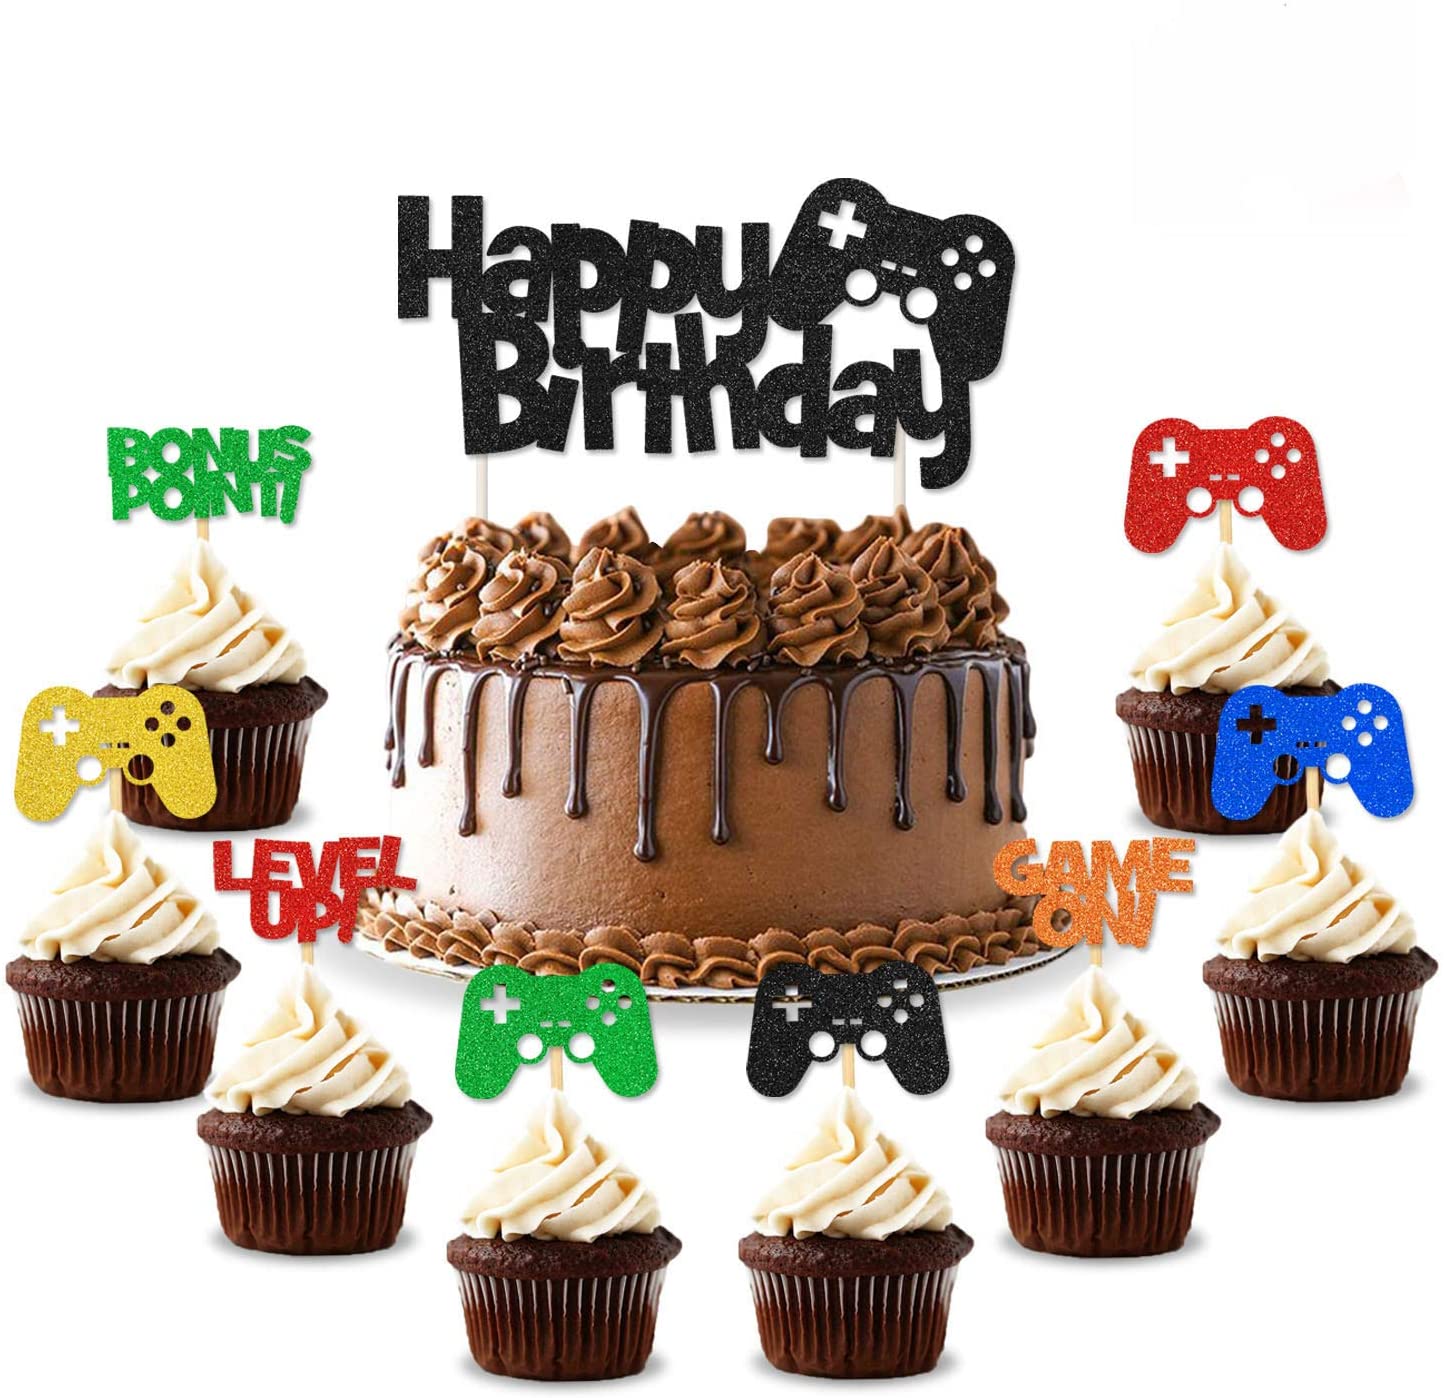 24 Pieces Video Game Cupcake Toppers Game Theme Cupcake Toppers Gaming Cupcake Picks for Gaming Theme Party and Birthday Party Favors,6 Styles 